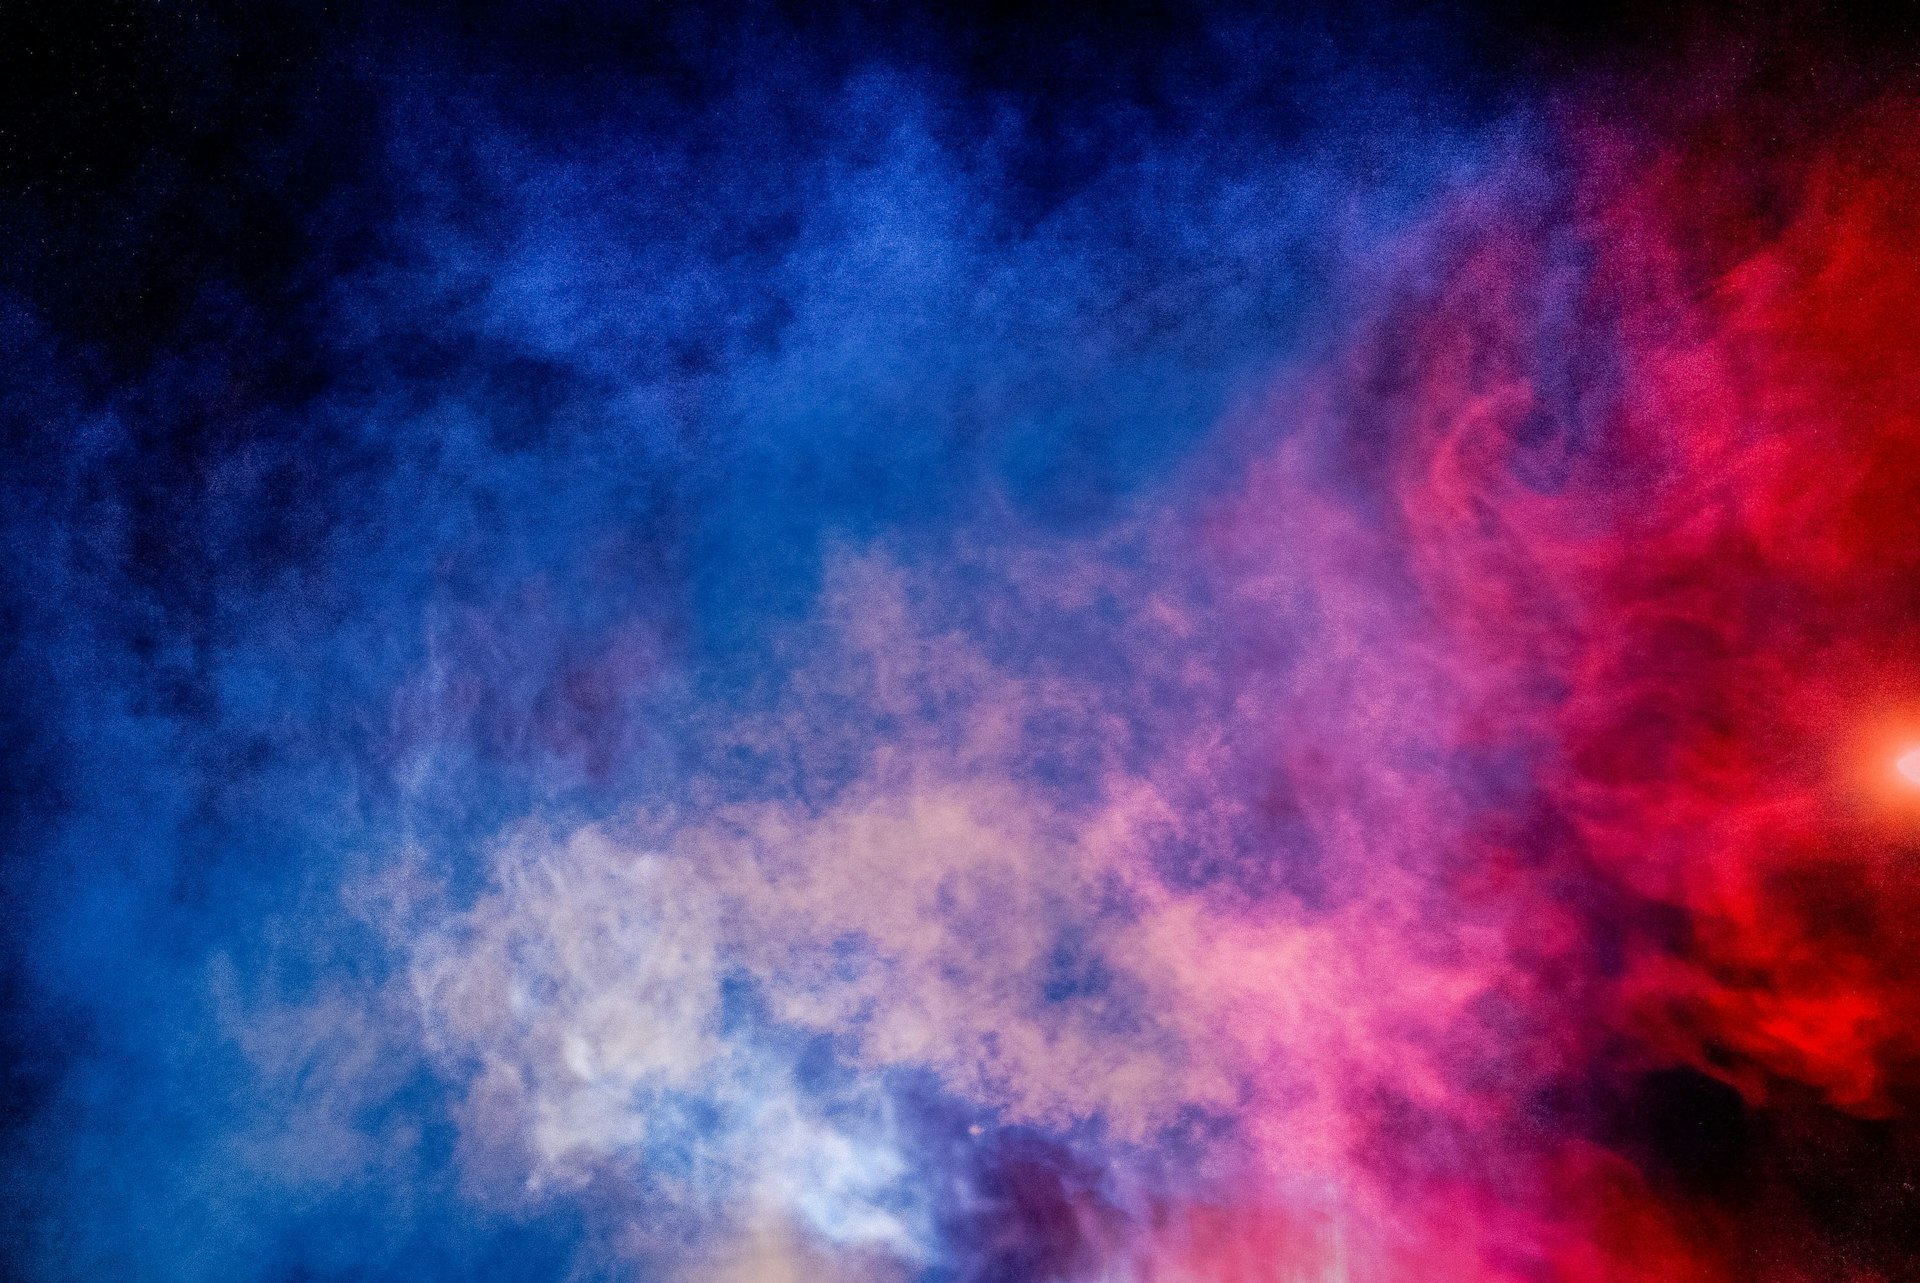 A composite of red smoke and blue smoke made from the lights and steam from the police cruisers in Flint.